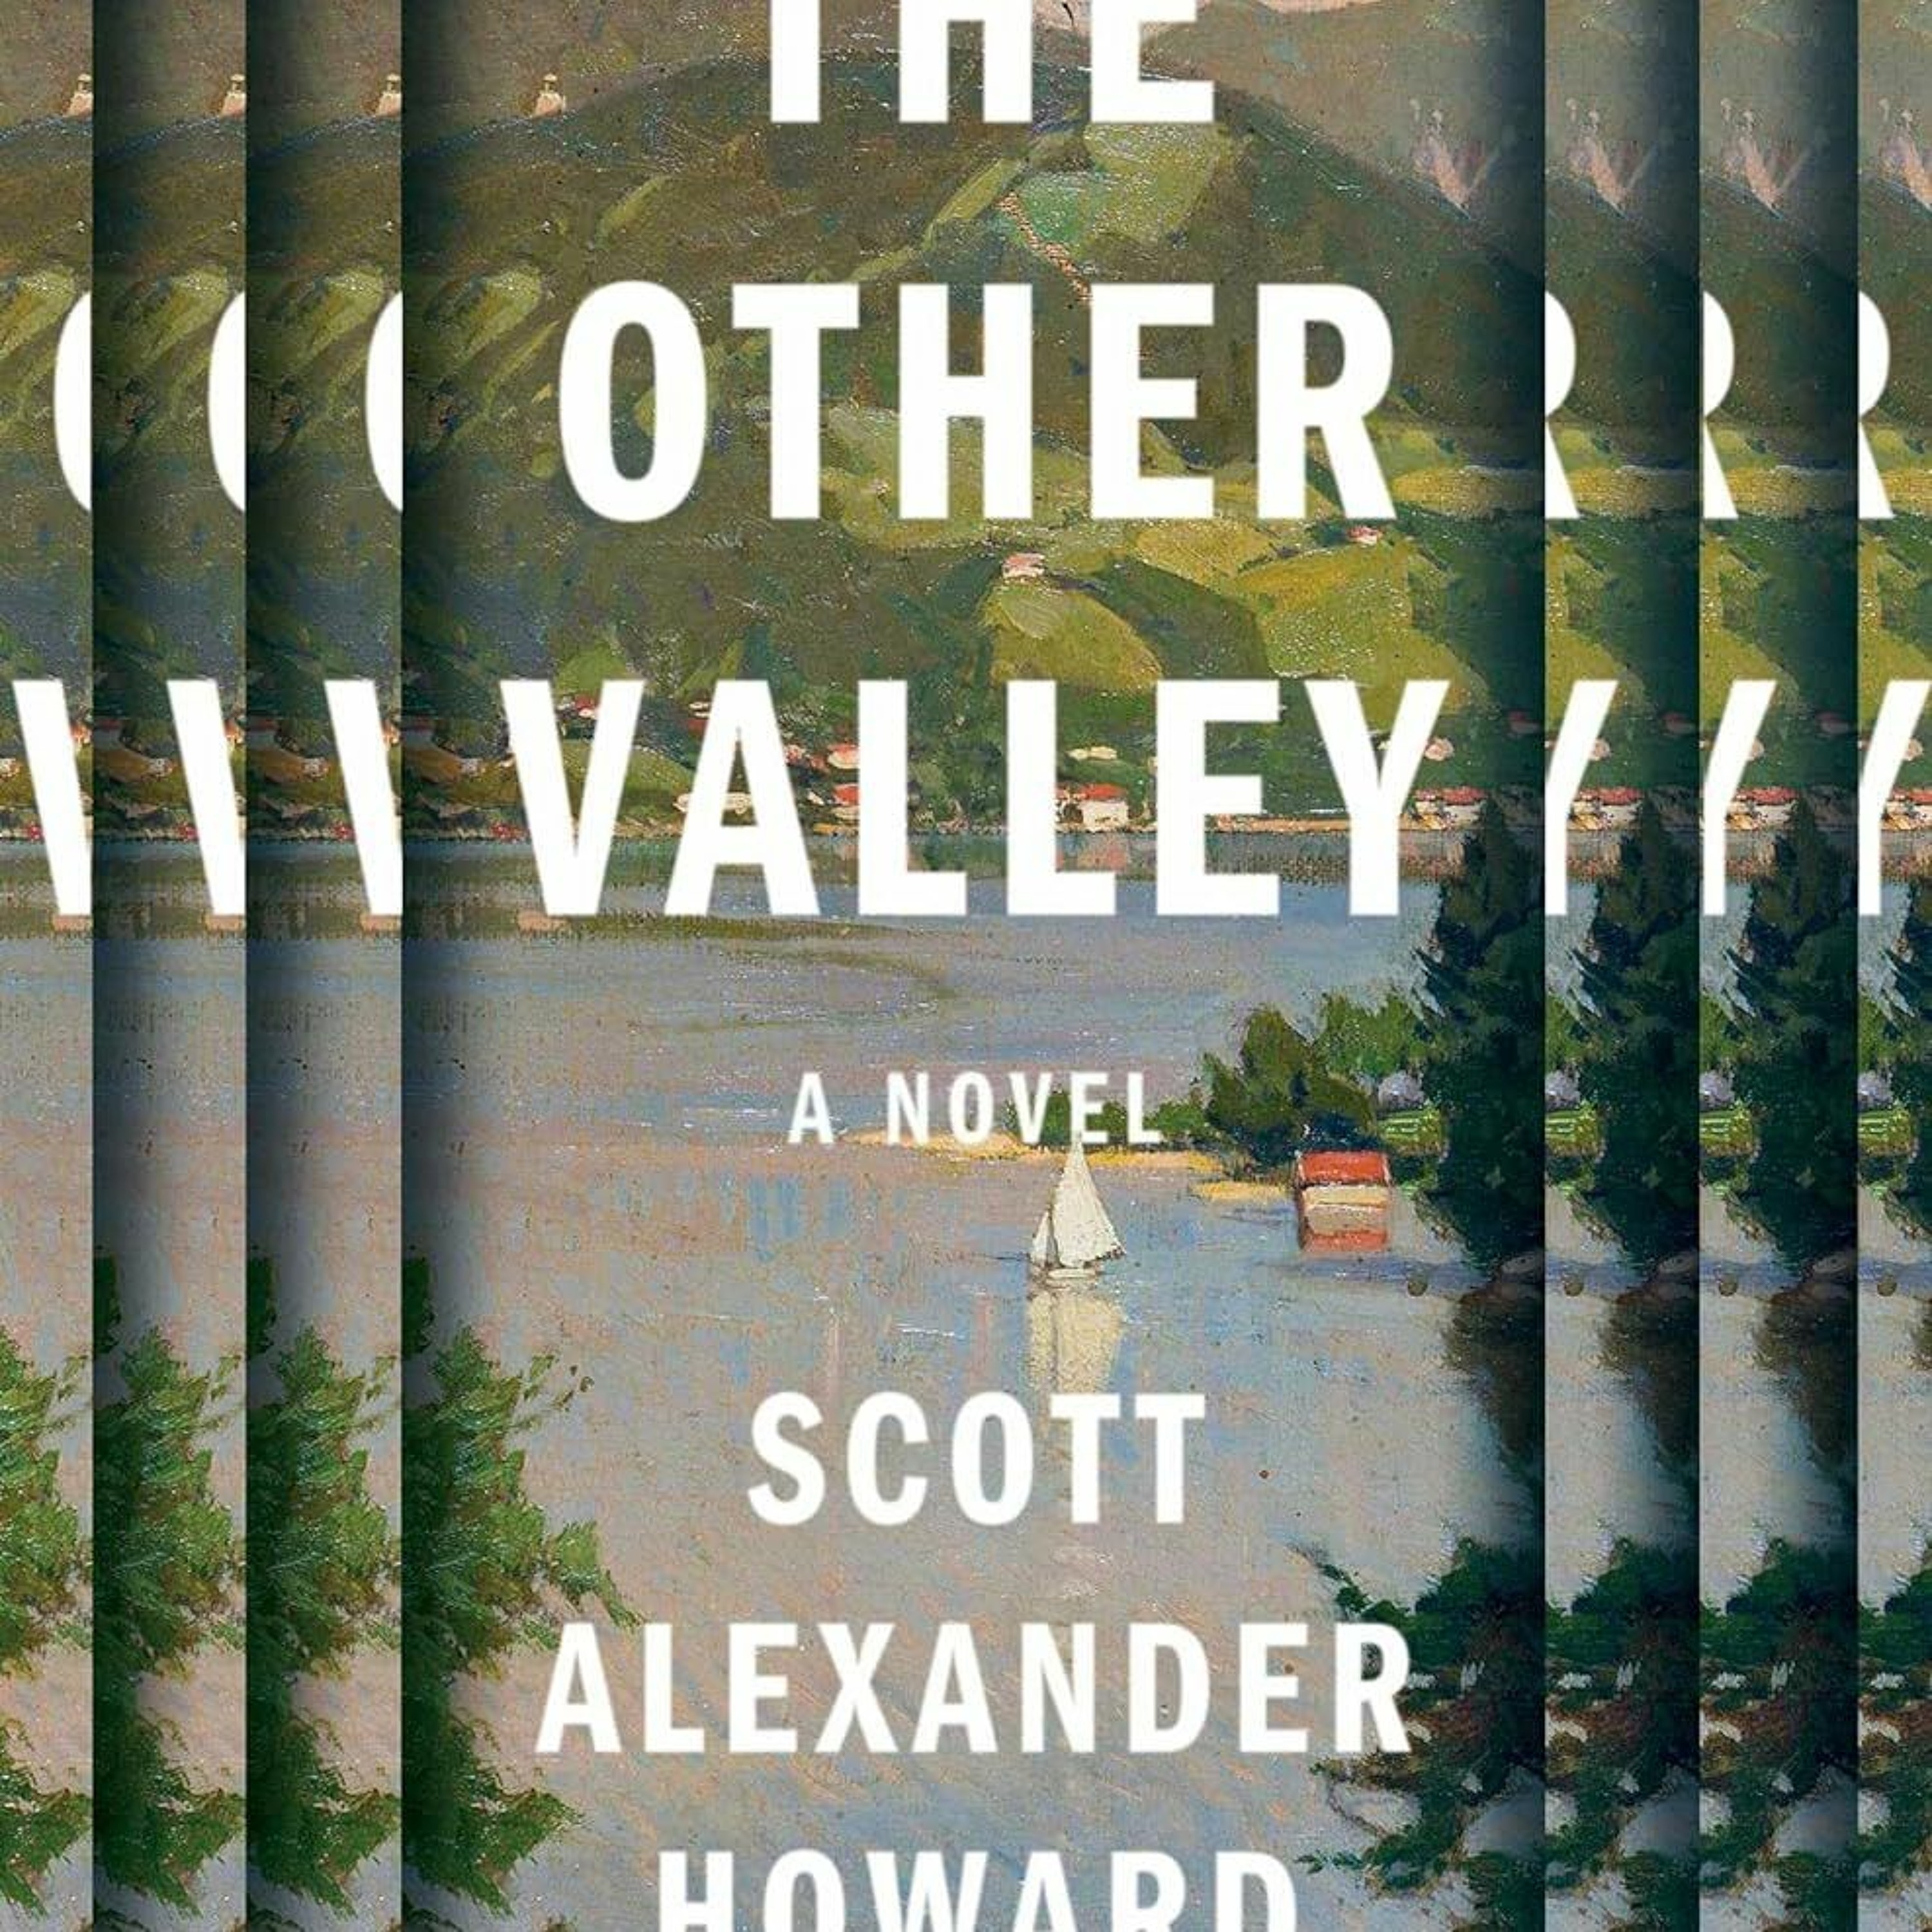 Scott Alexander Howard Talks The Other Valley on Writing While Handicapped!